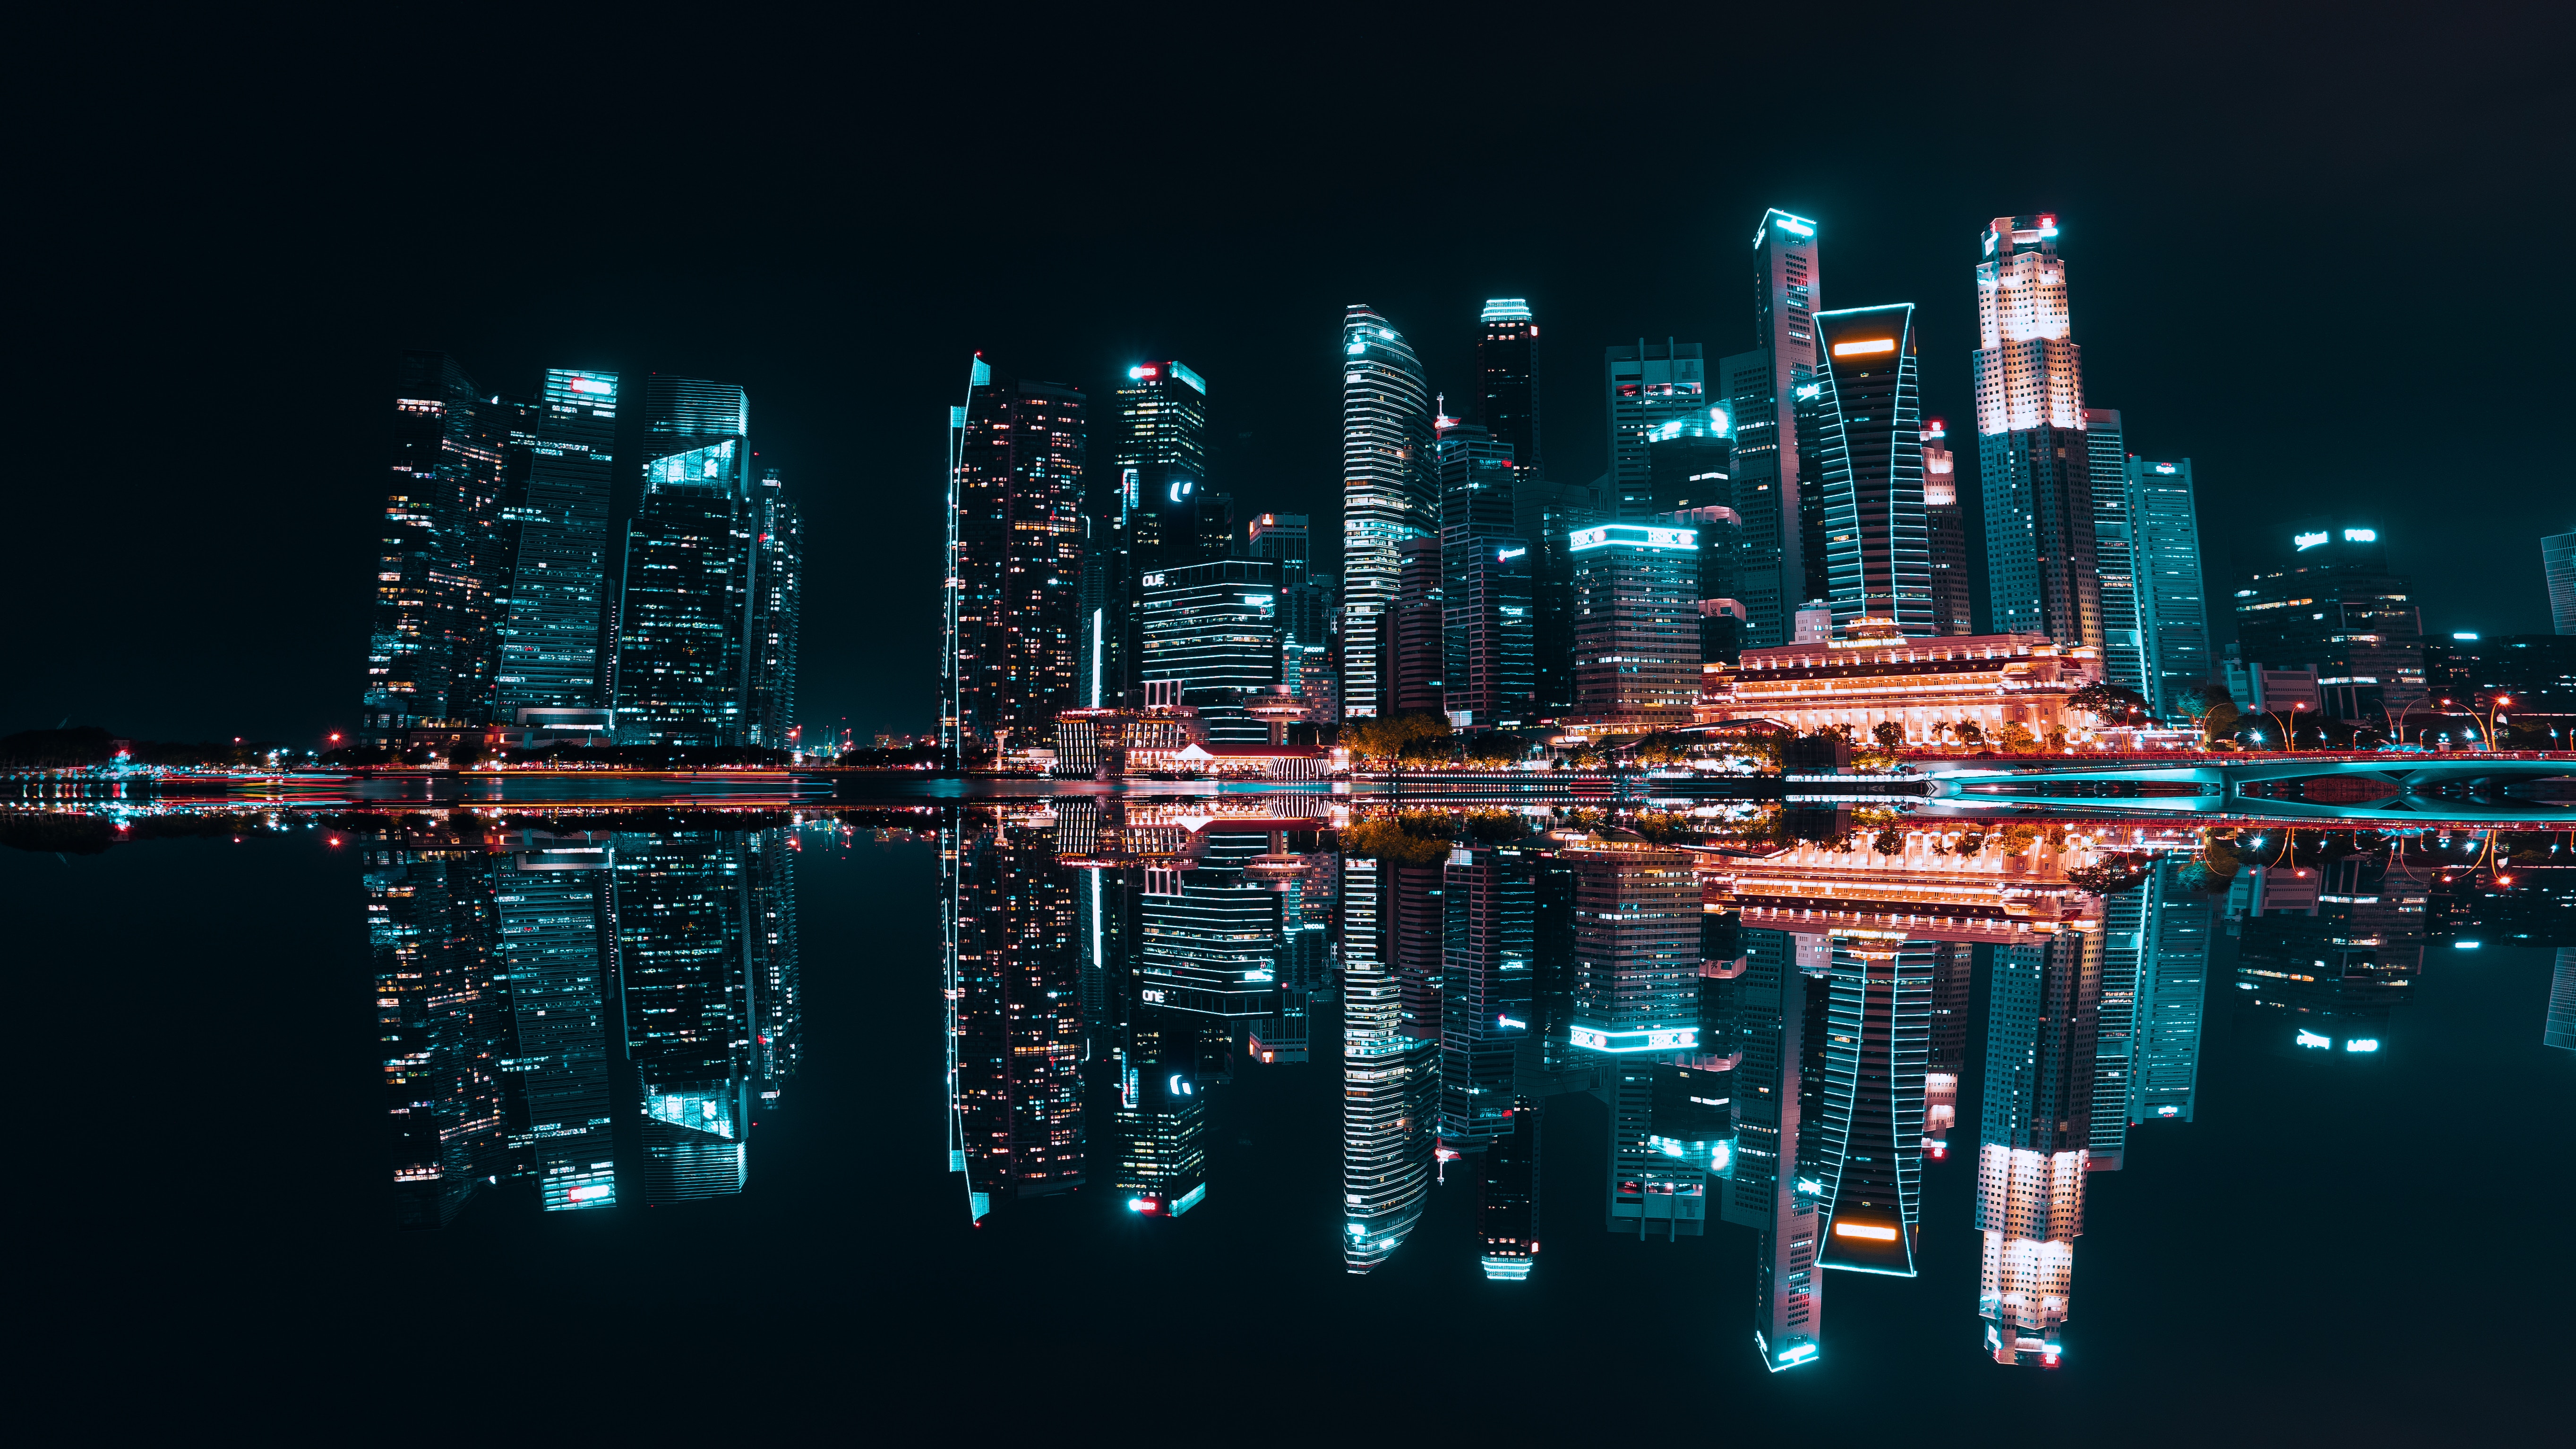 night city, illumination, lake, cities, building, reflection, skyscrapers, backlight, electricity wallpapers for tablet